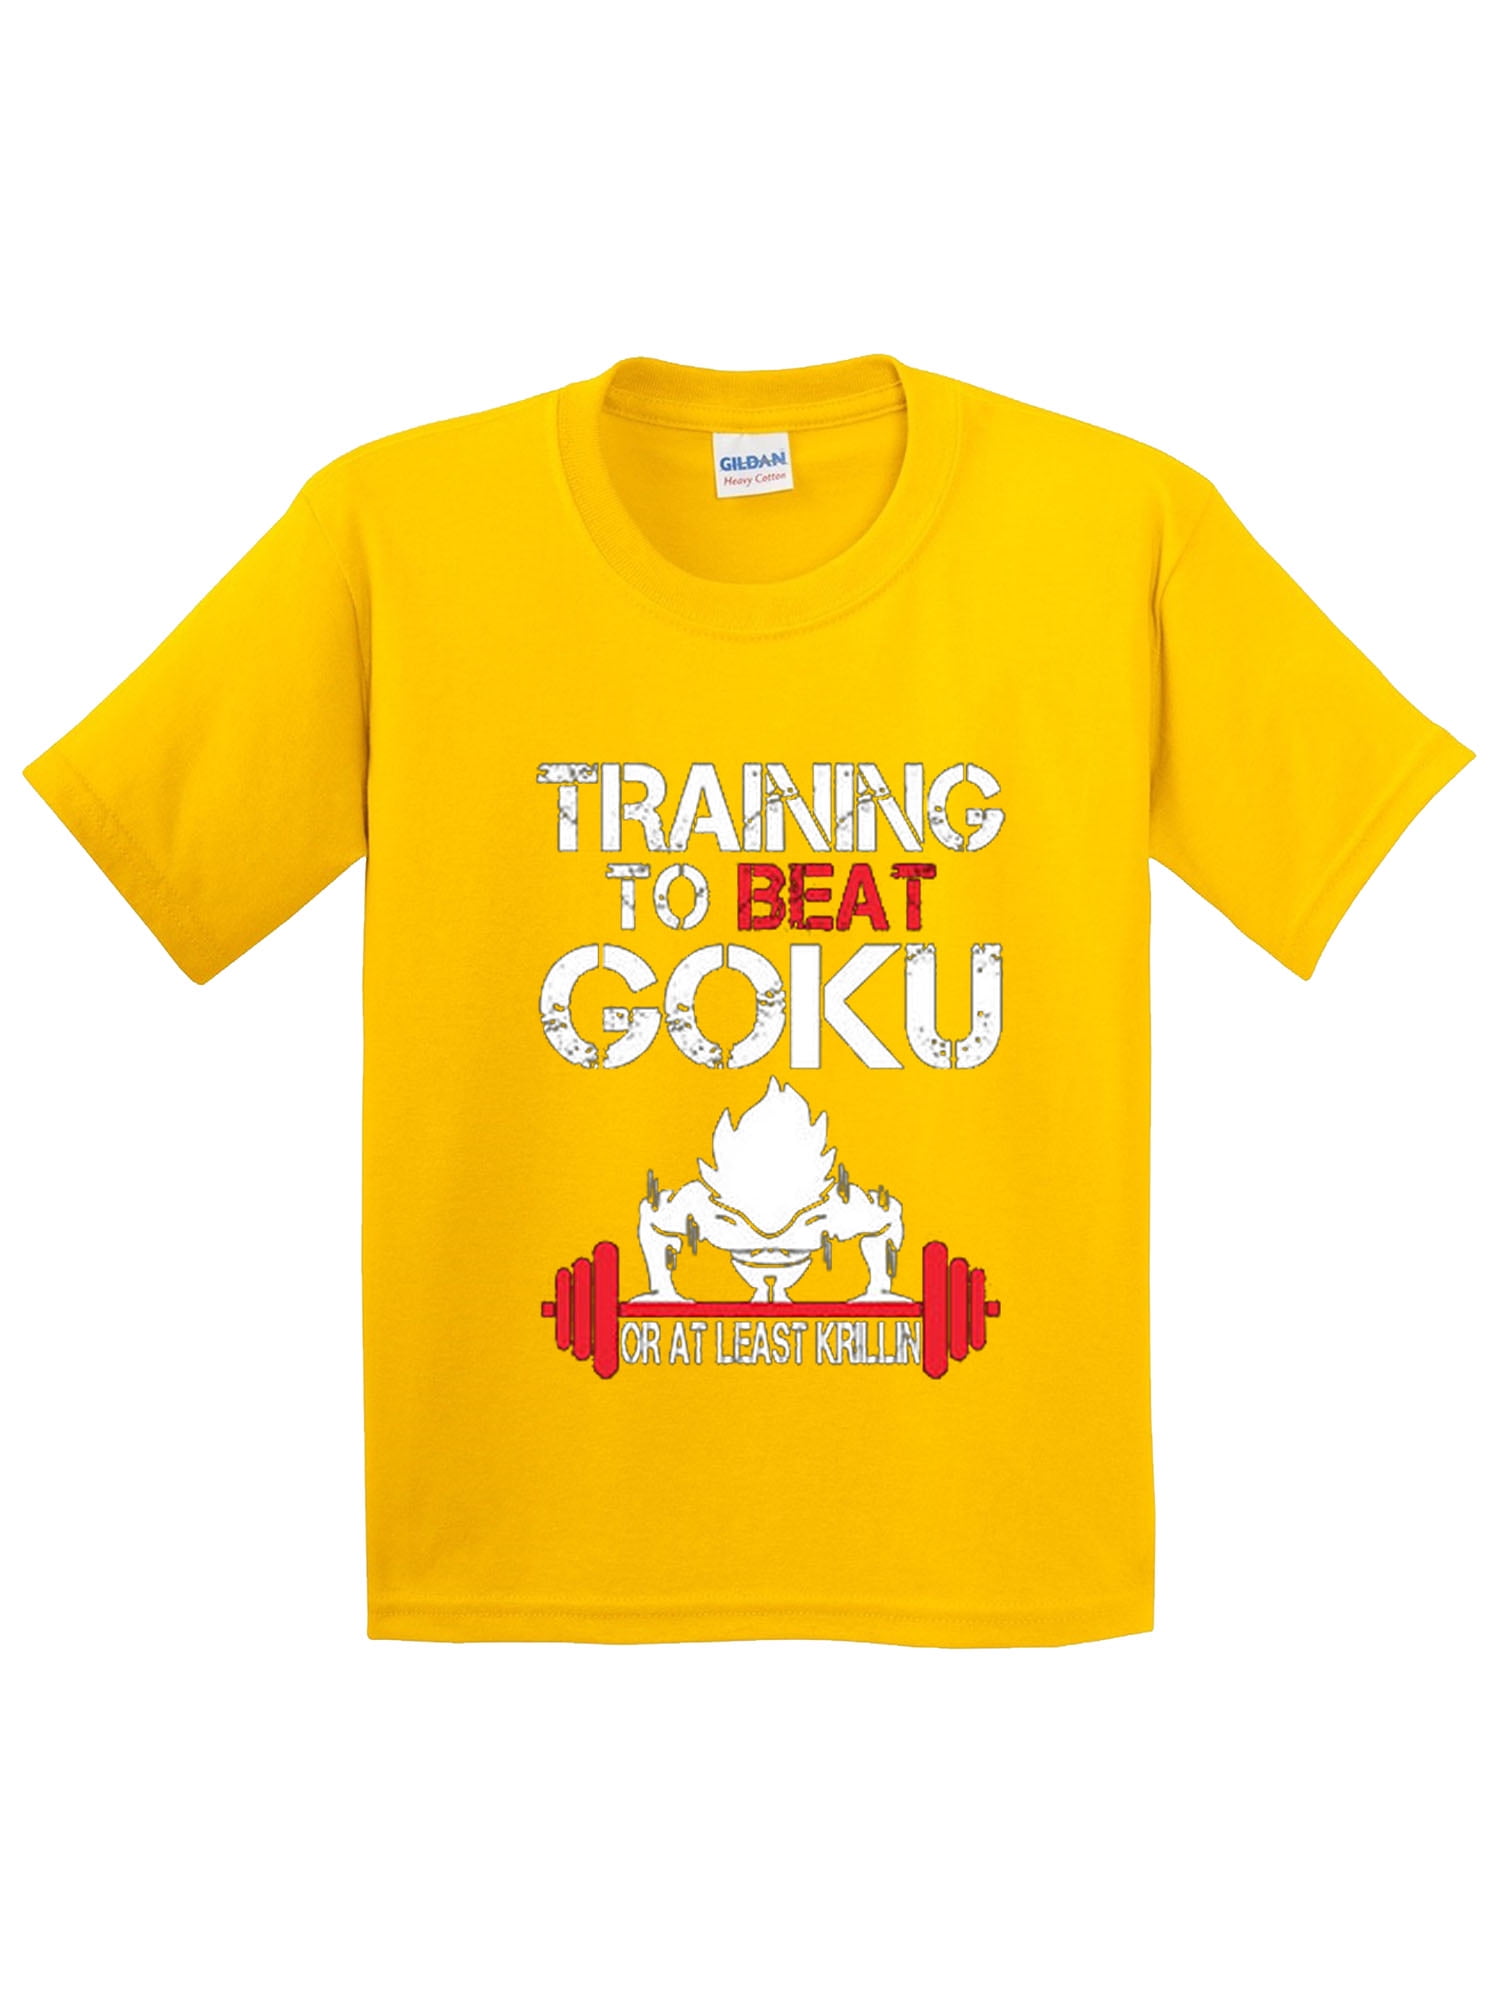 Goku T Shirts Roblox Toffee Art | Cool Things To Build In Roblox Build ...